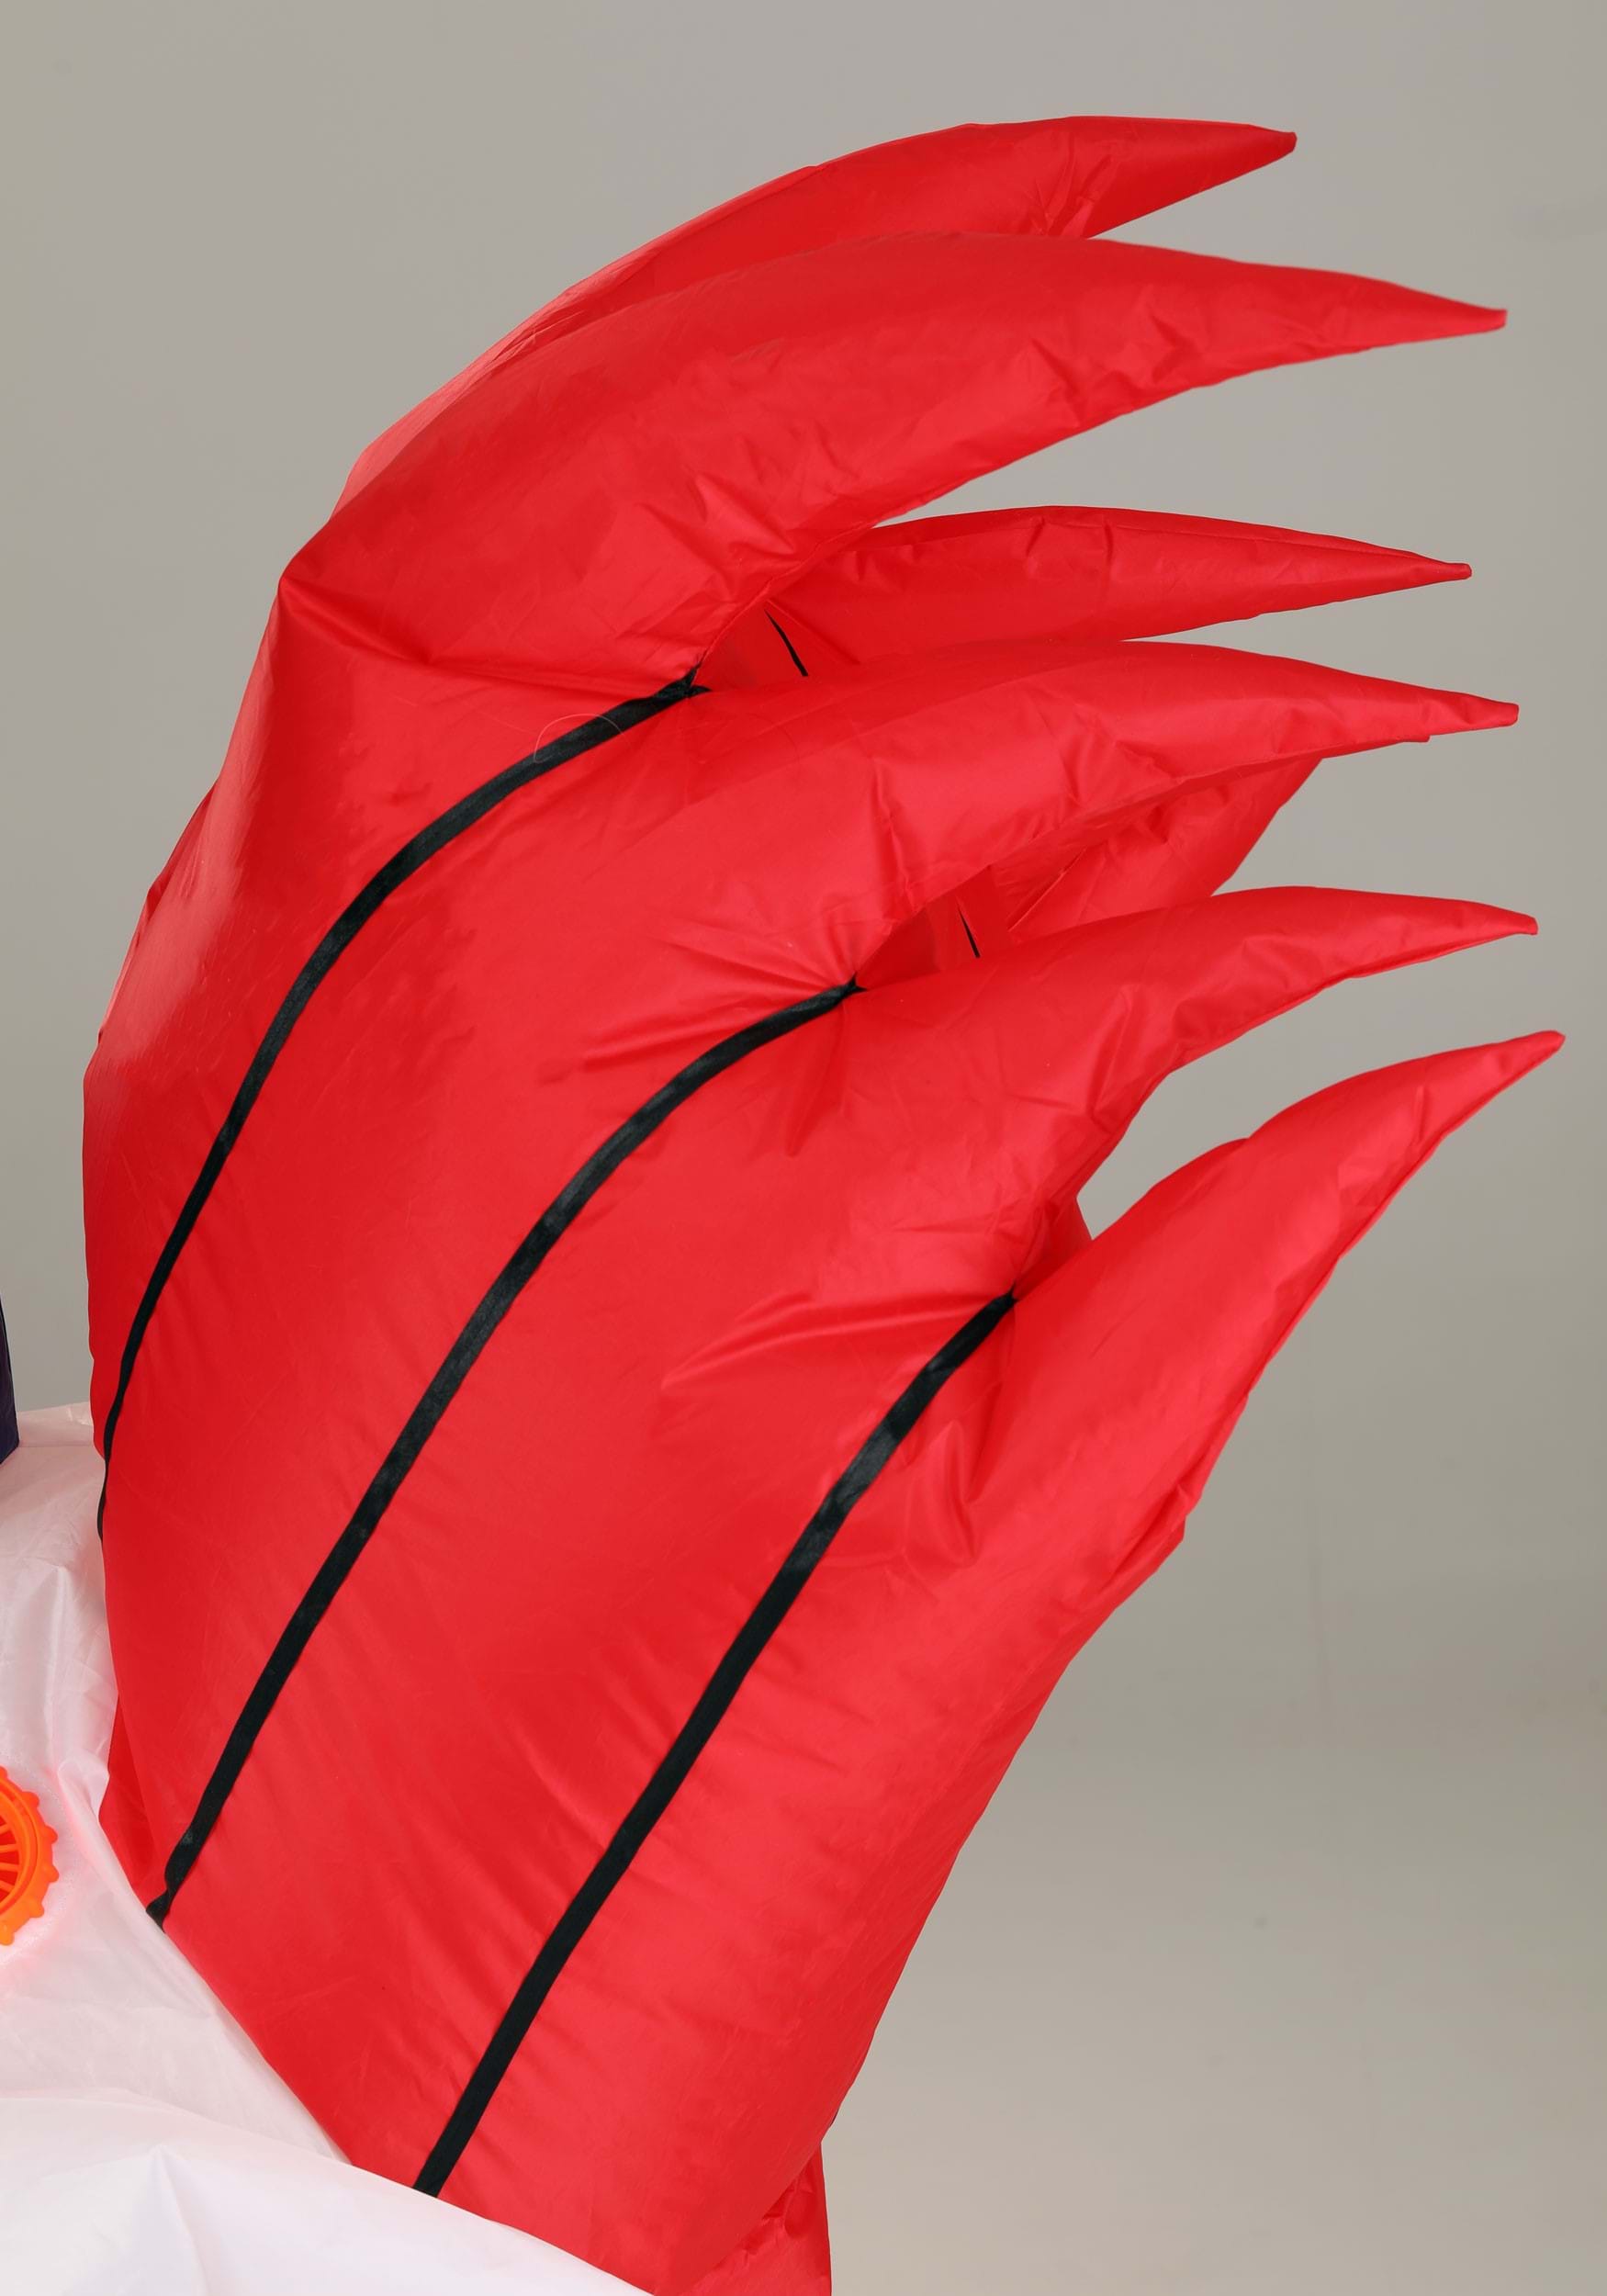 Inflatable Ride-On Rooster Fancy Dress Costume For Adults